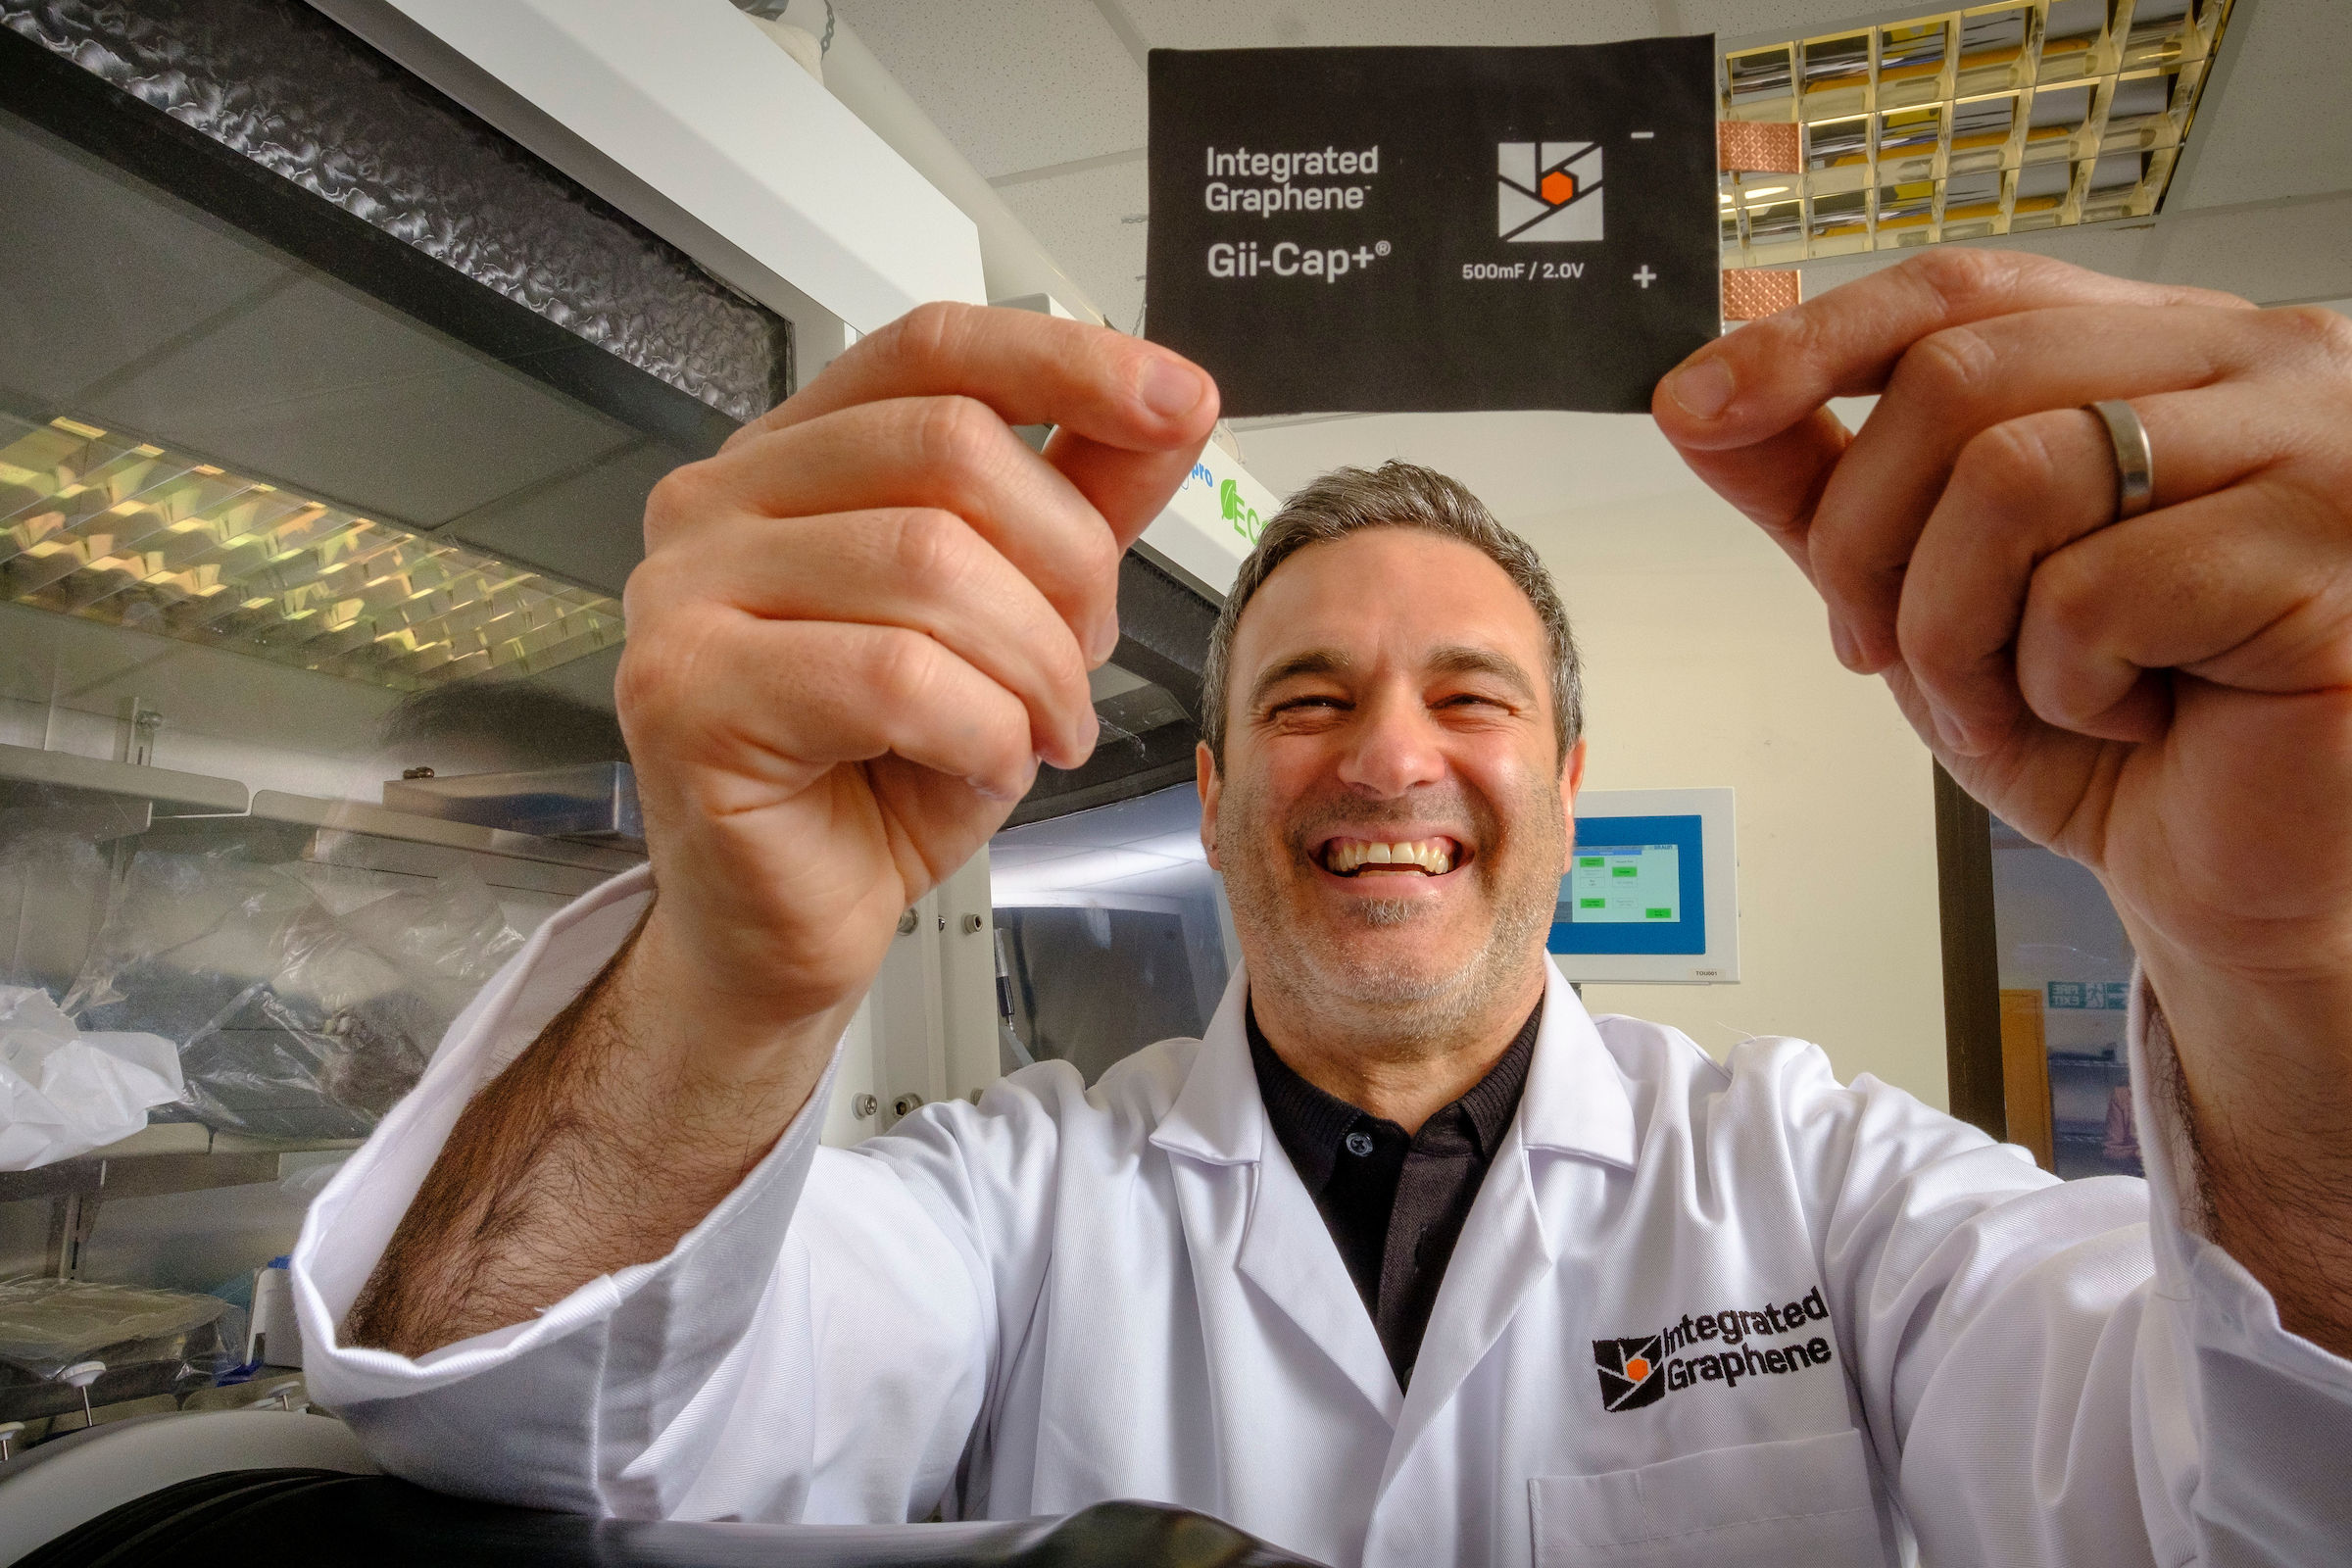 Integrated Graphene to invest £8m in scaling-up world’s first market-ready graphene